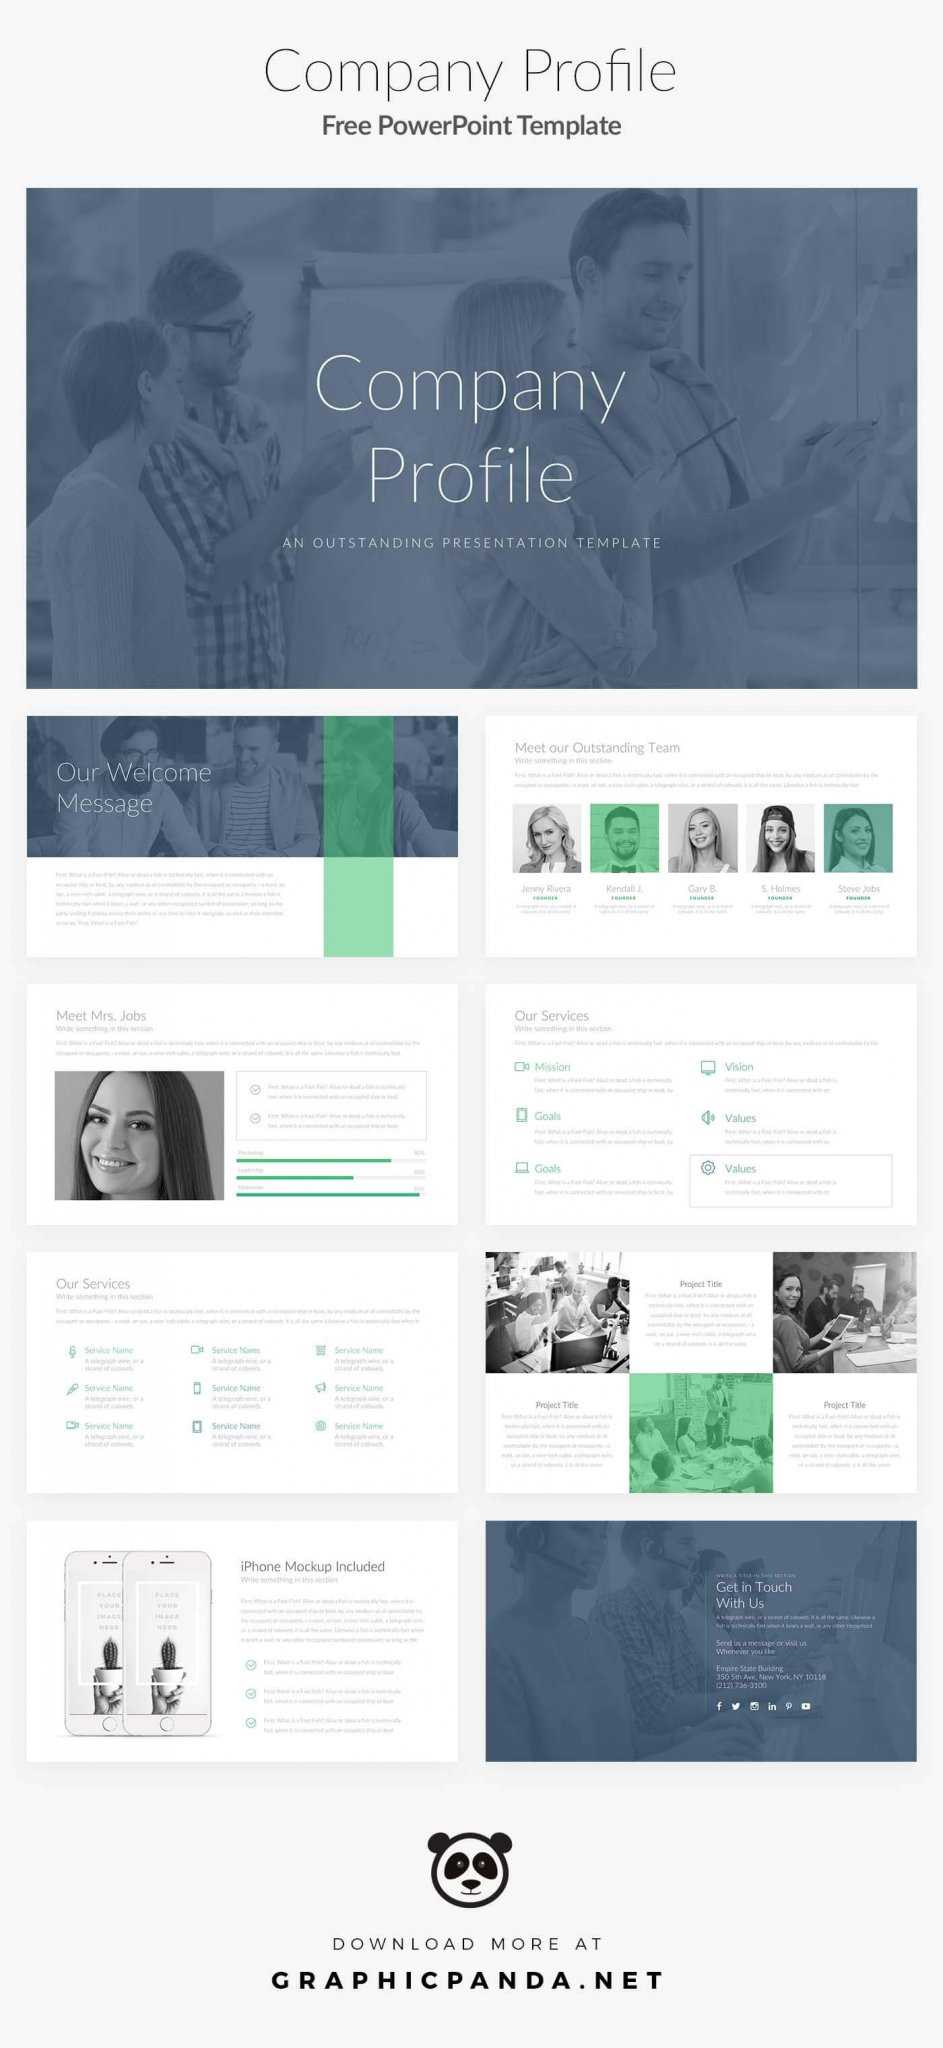 Company Profile Free Powerpoint Presentation Template For Biography Powerpoint Template